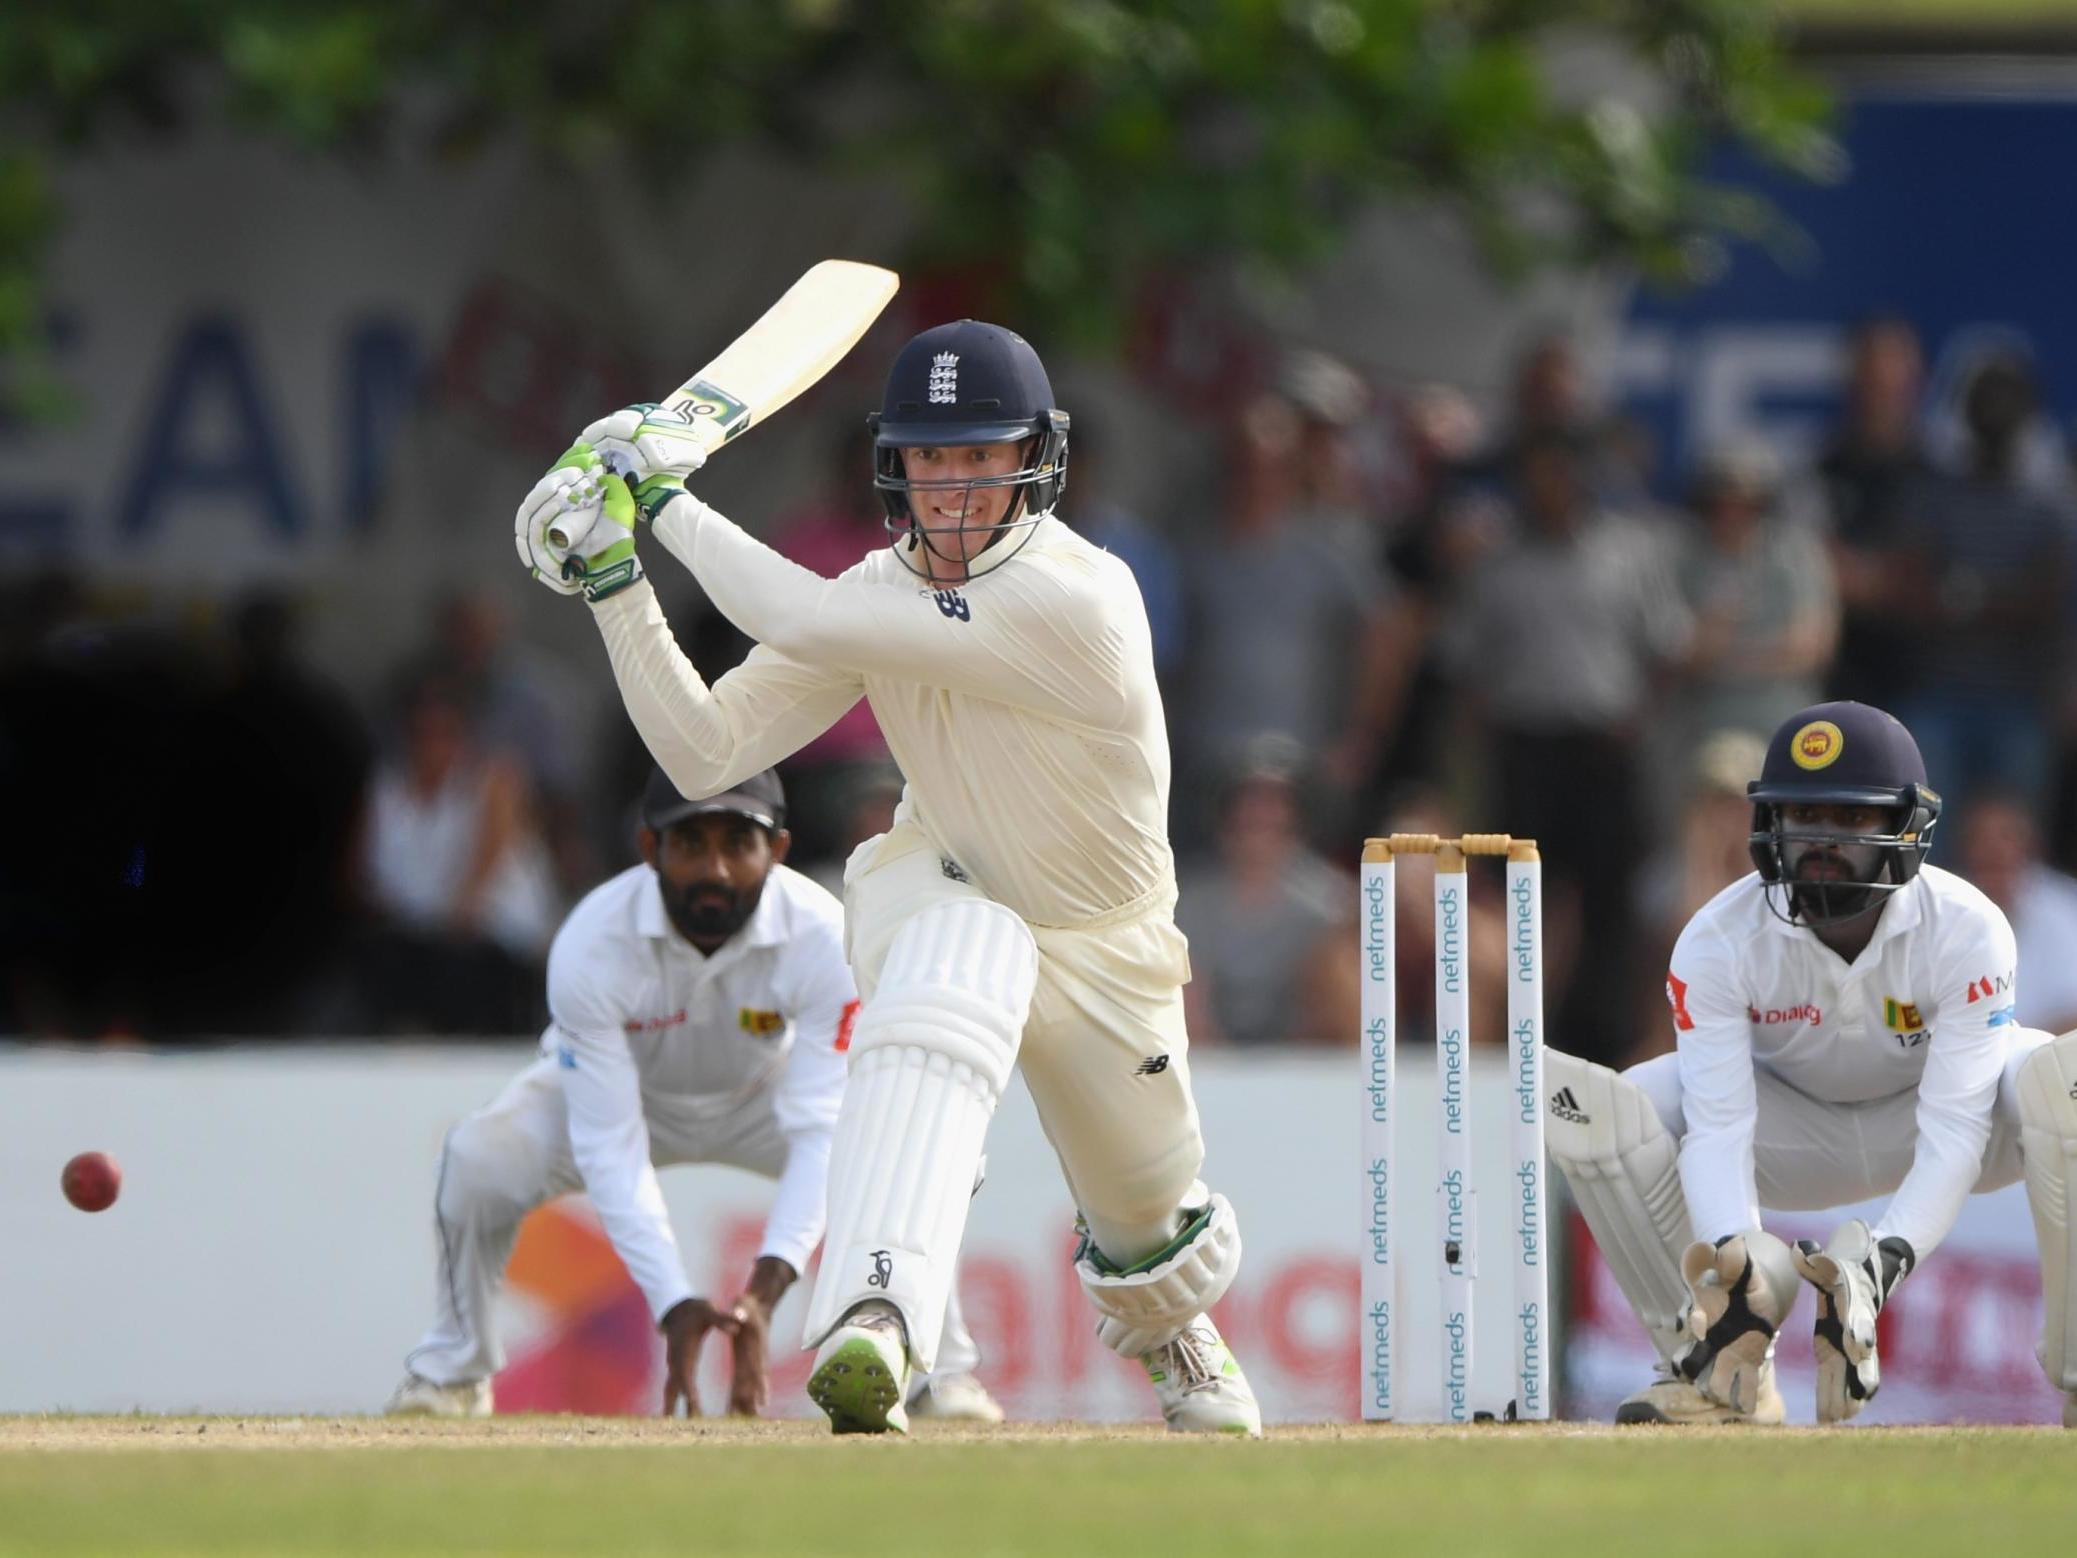 Keaton Jennings sweeps the ball towards the boundary during the third day